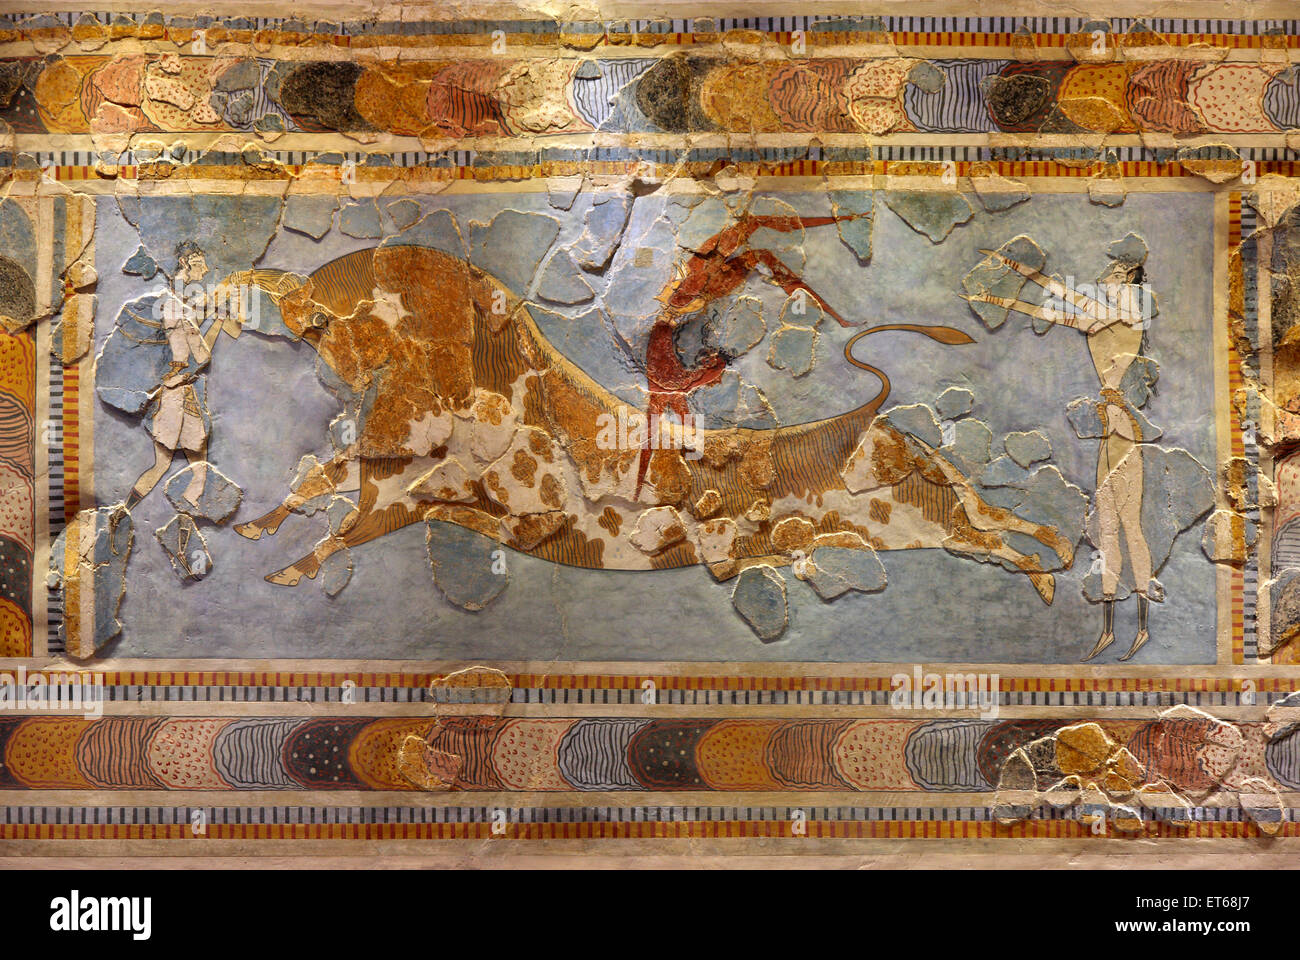 The Bull-leaping fresco from the Minoan Palace of Knossos, in the Archaeological Museum of Heraklion, Crete, Greece Stock Photo